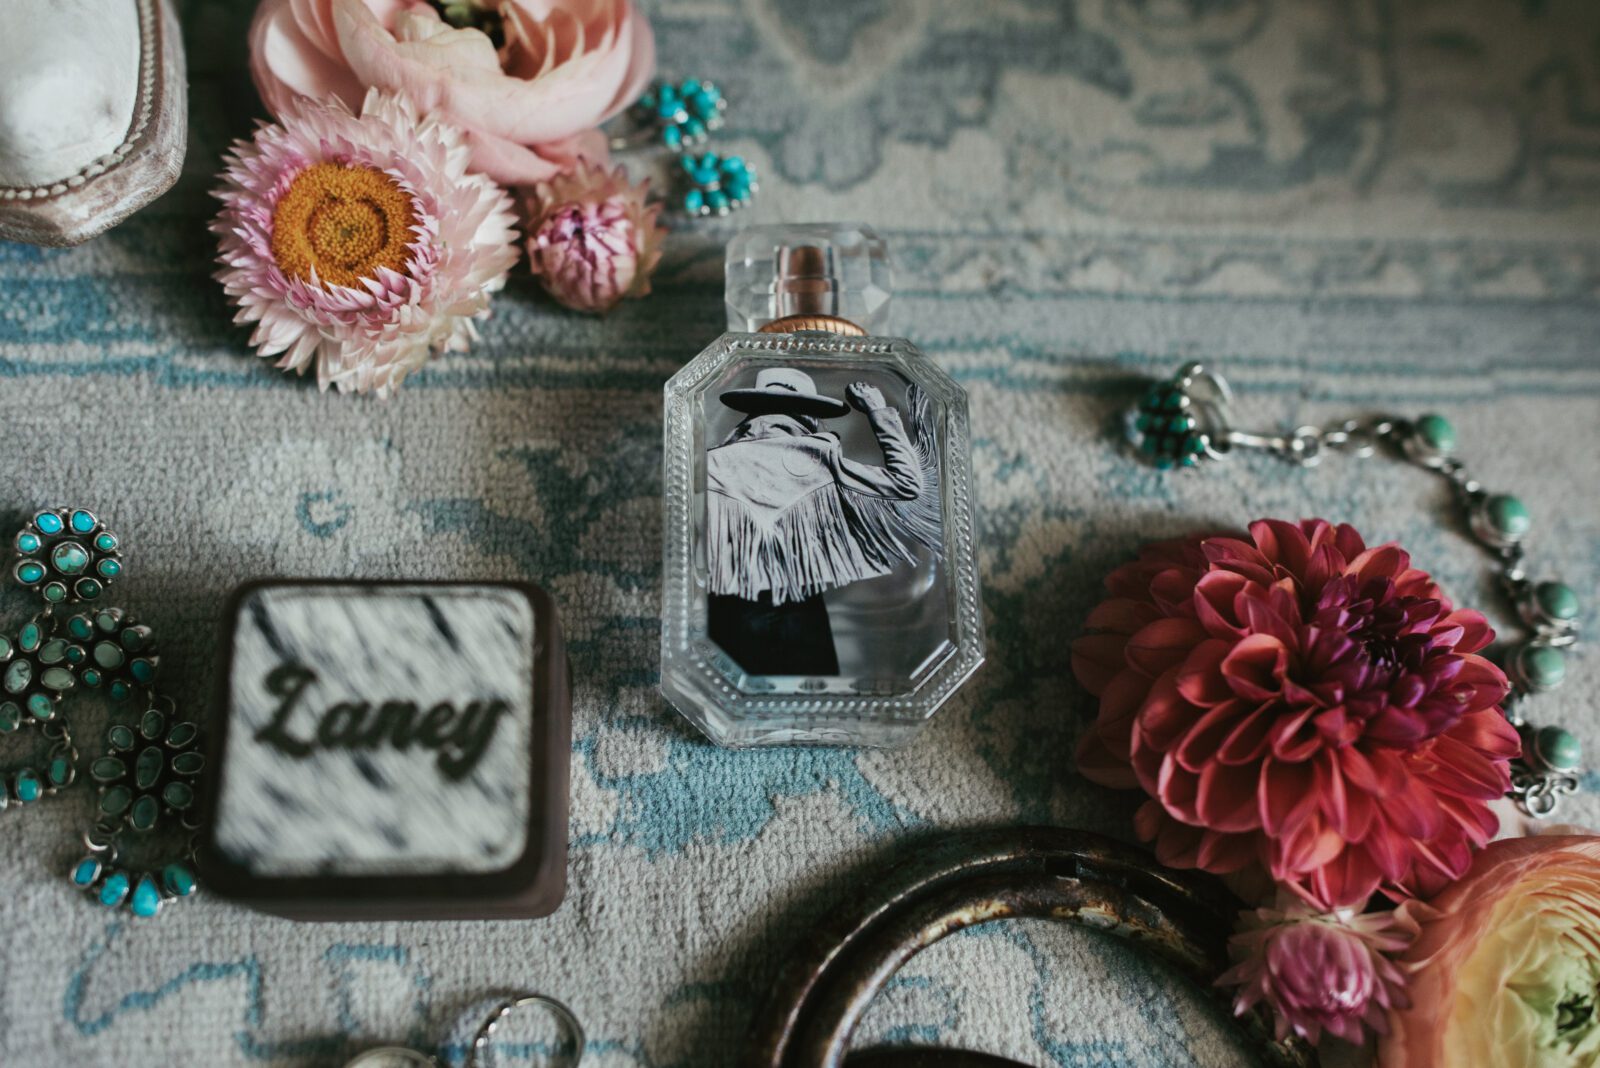 wedding details, perfume, ring box and wedding florals scattered on rug